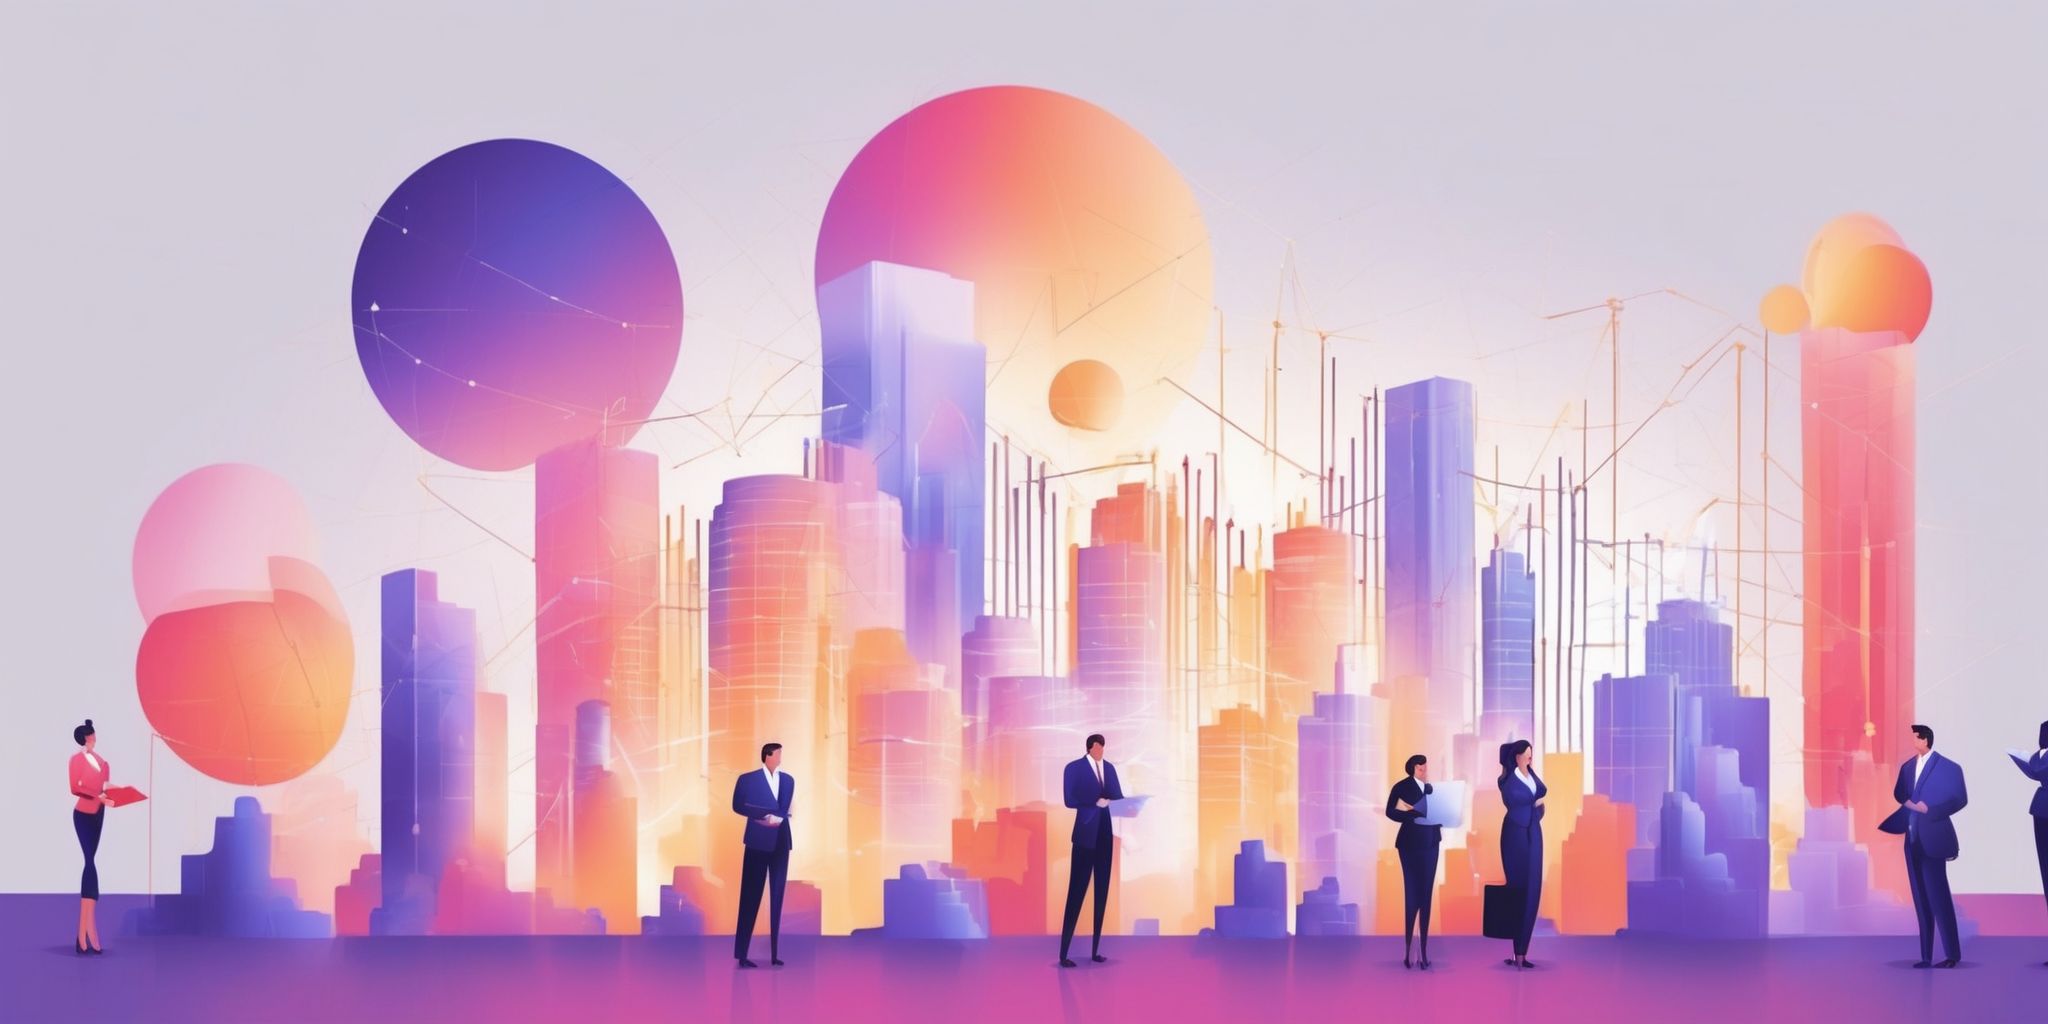 Business expansion in illustration style with gradients and white background